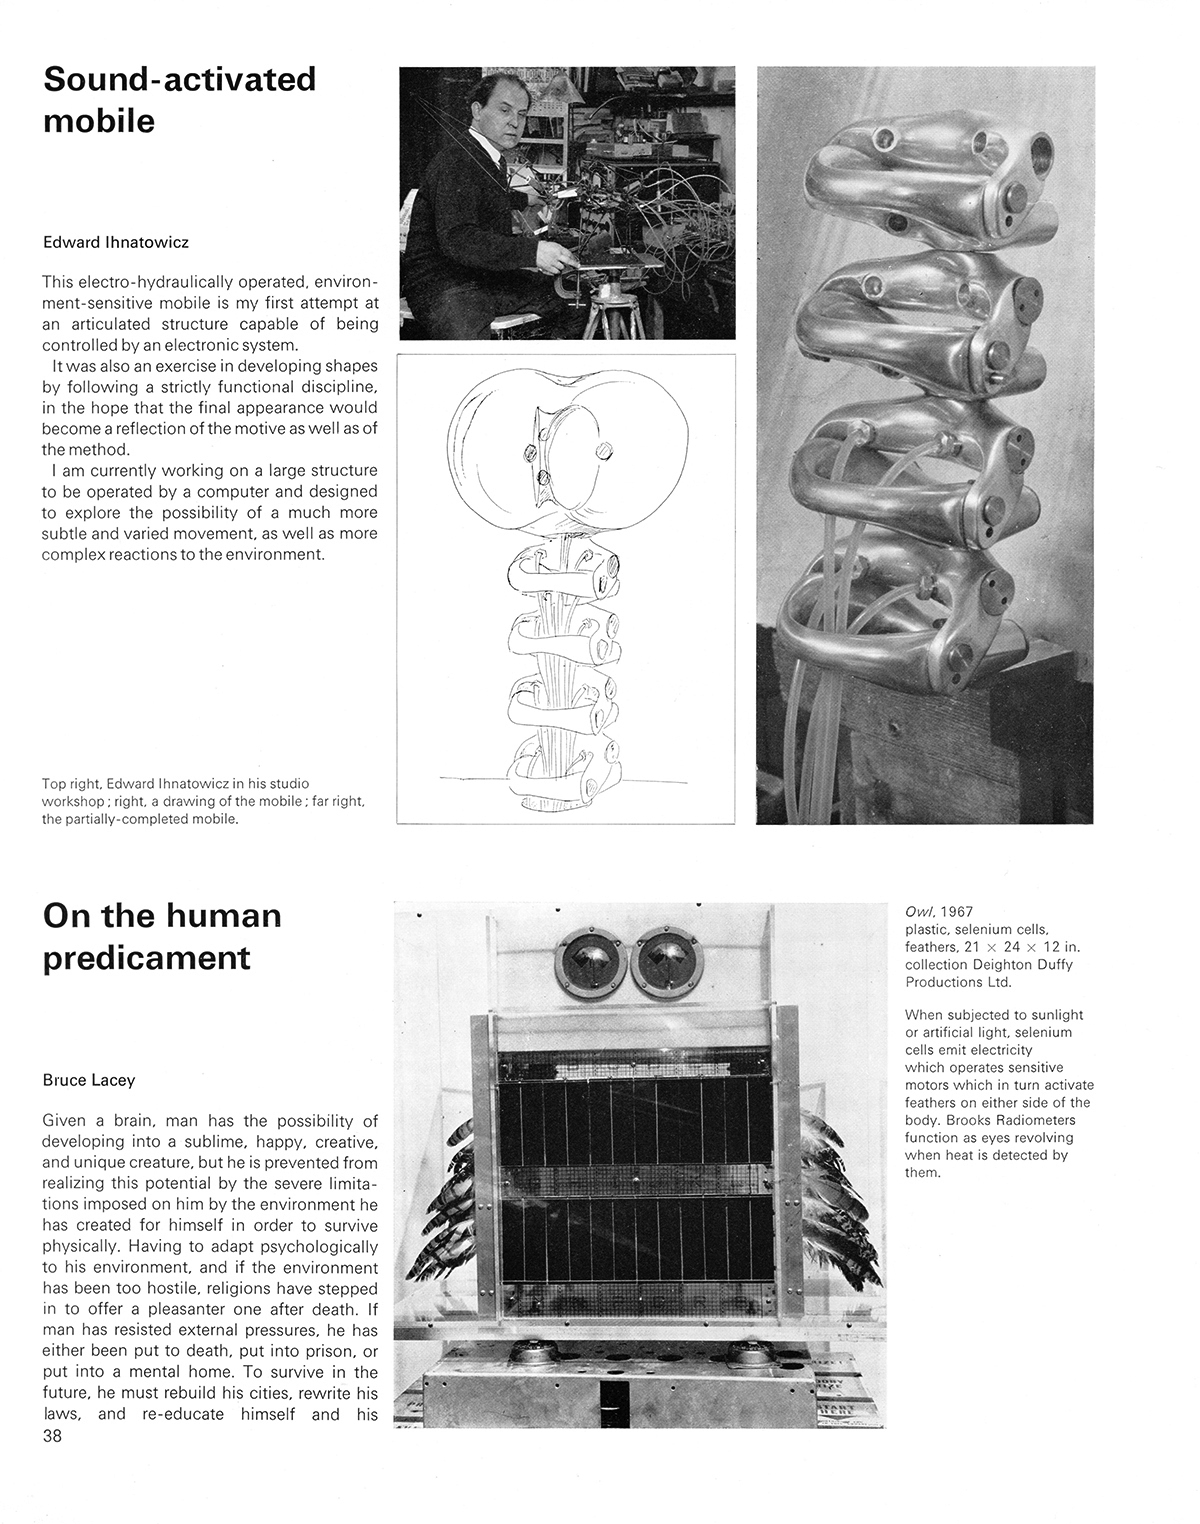 Sound-activated mobile & On the human predicament. Cybernetic Serendipity: The Computer and the Arts, Studio International Special Issue, 1968, page 38.